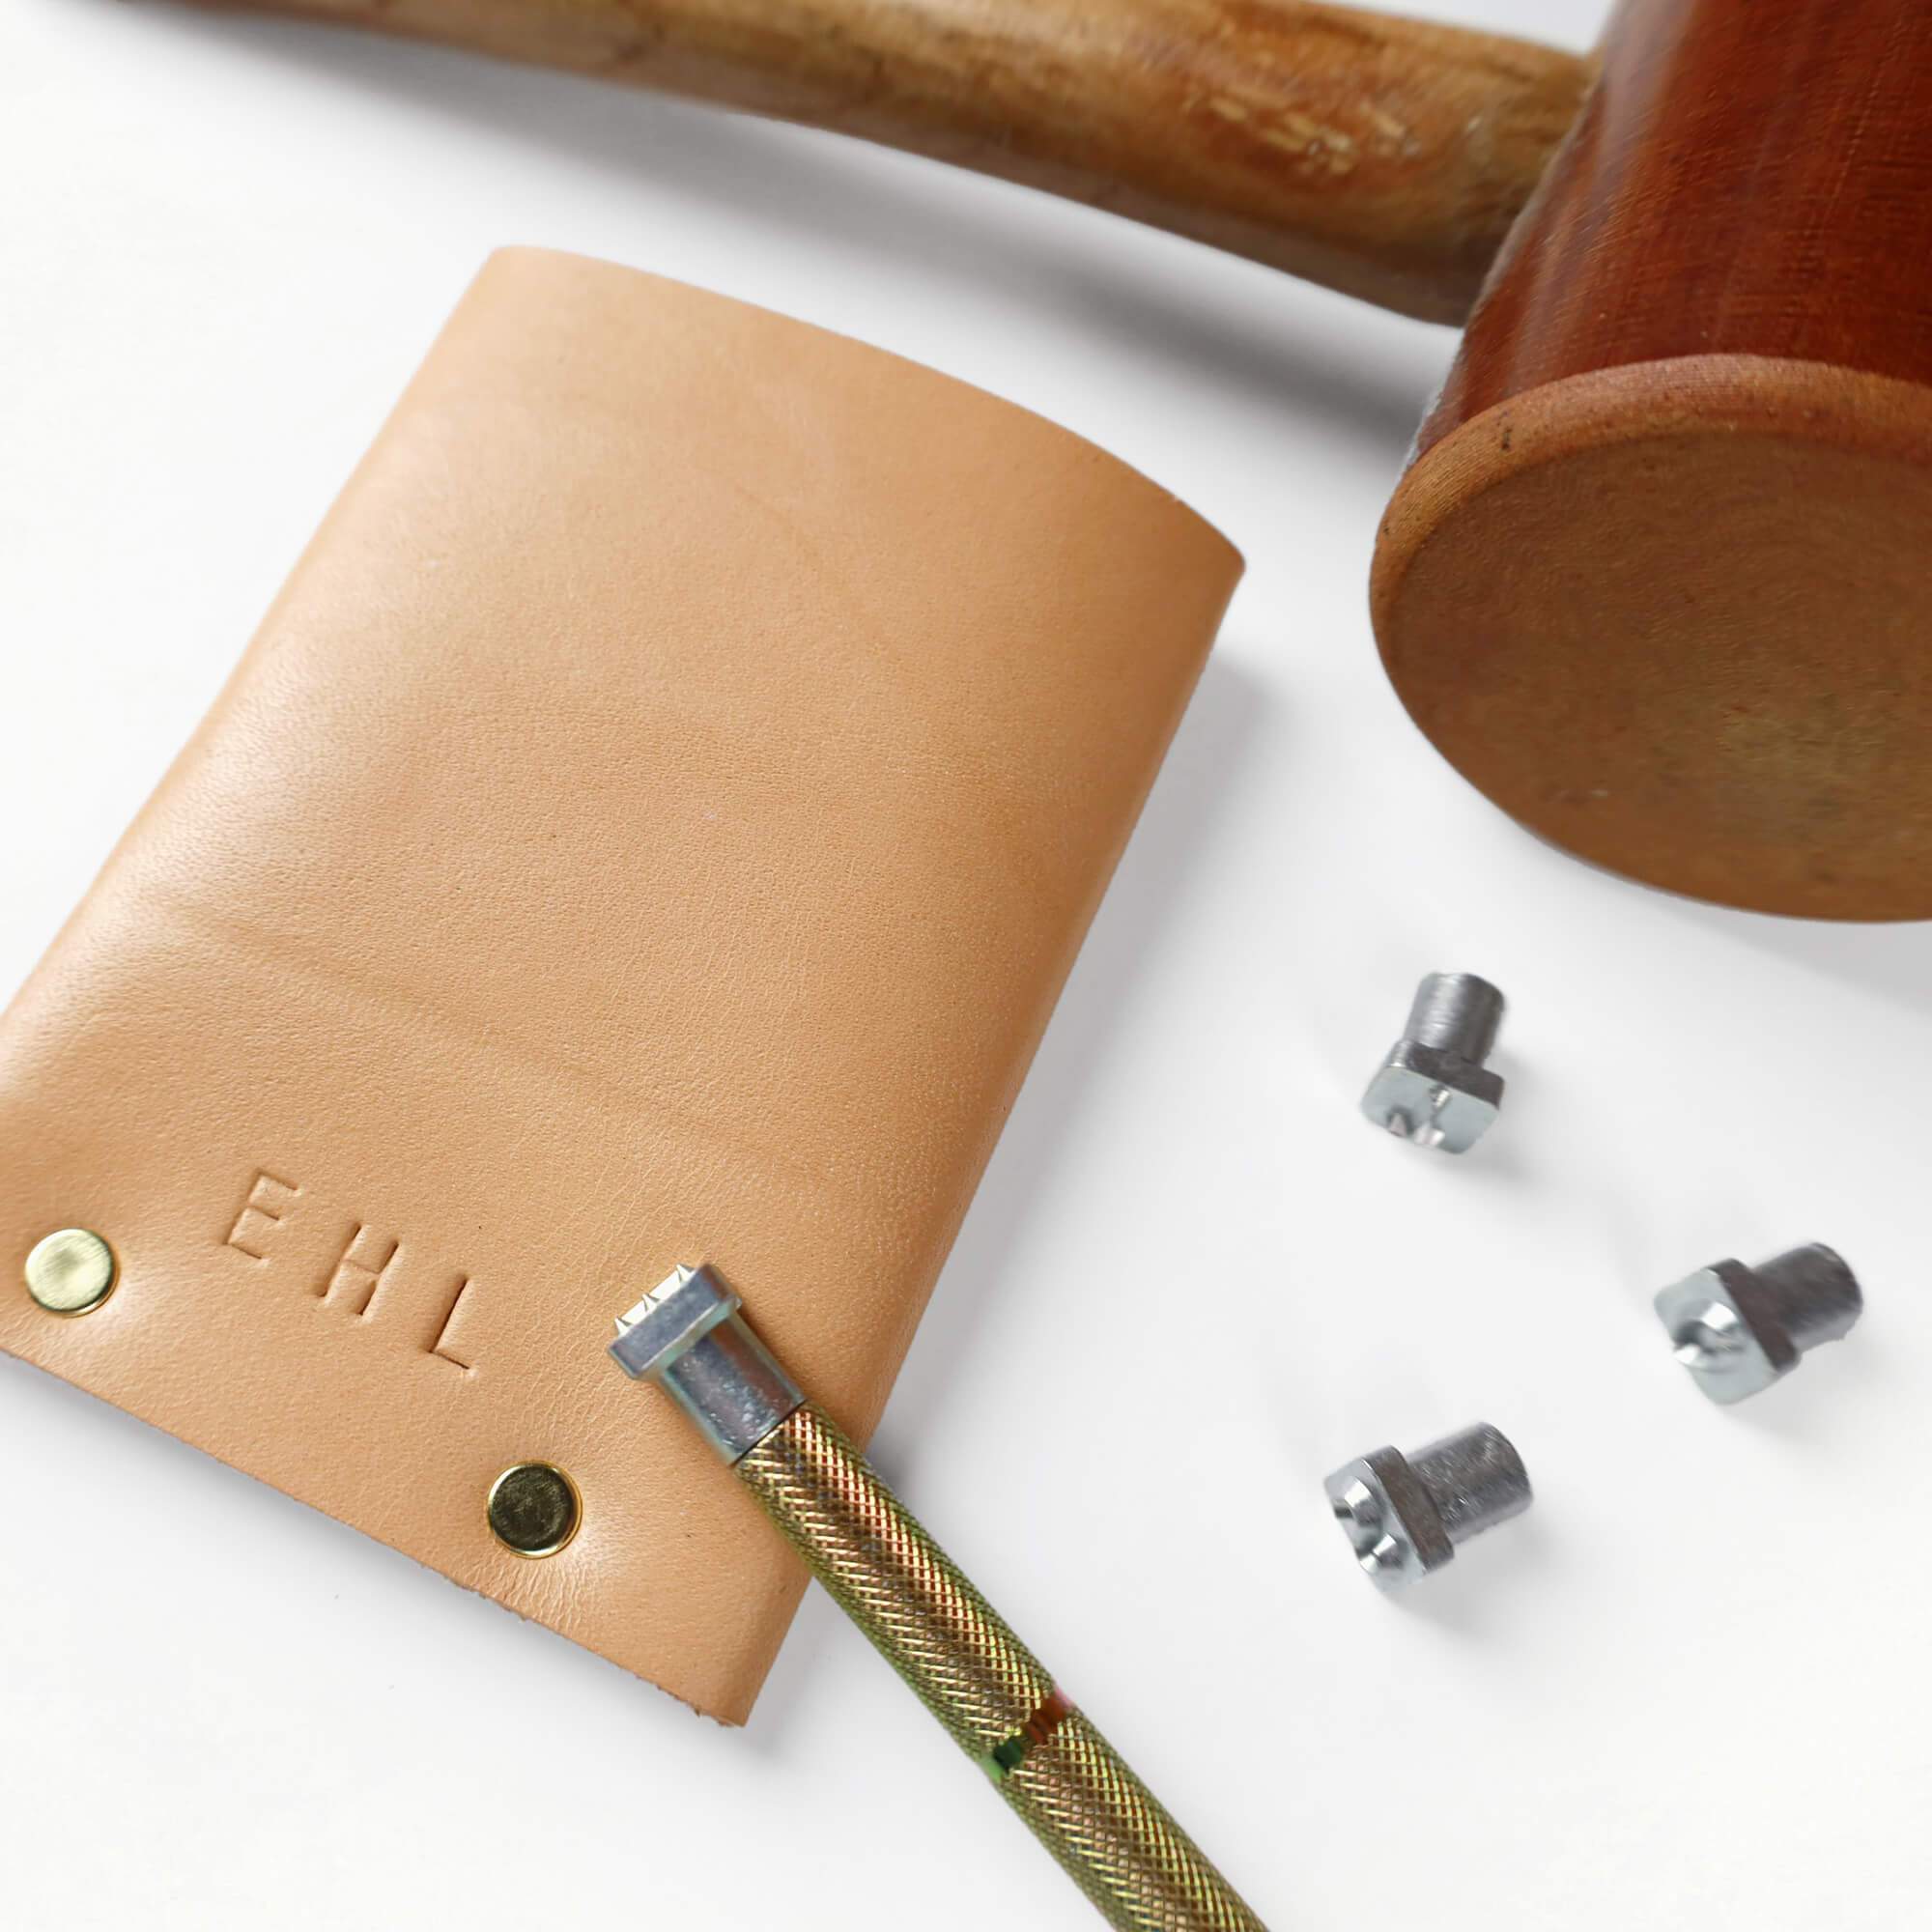 Leather Stamps, Buy Leather Stamping Tools Online Australia